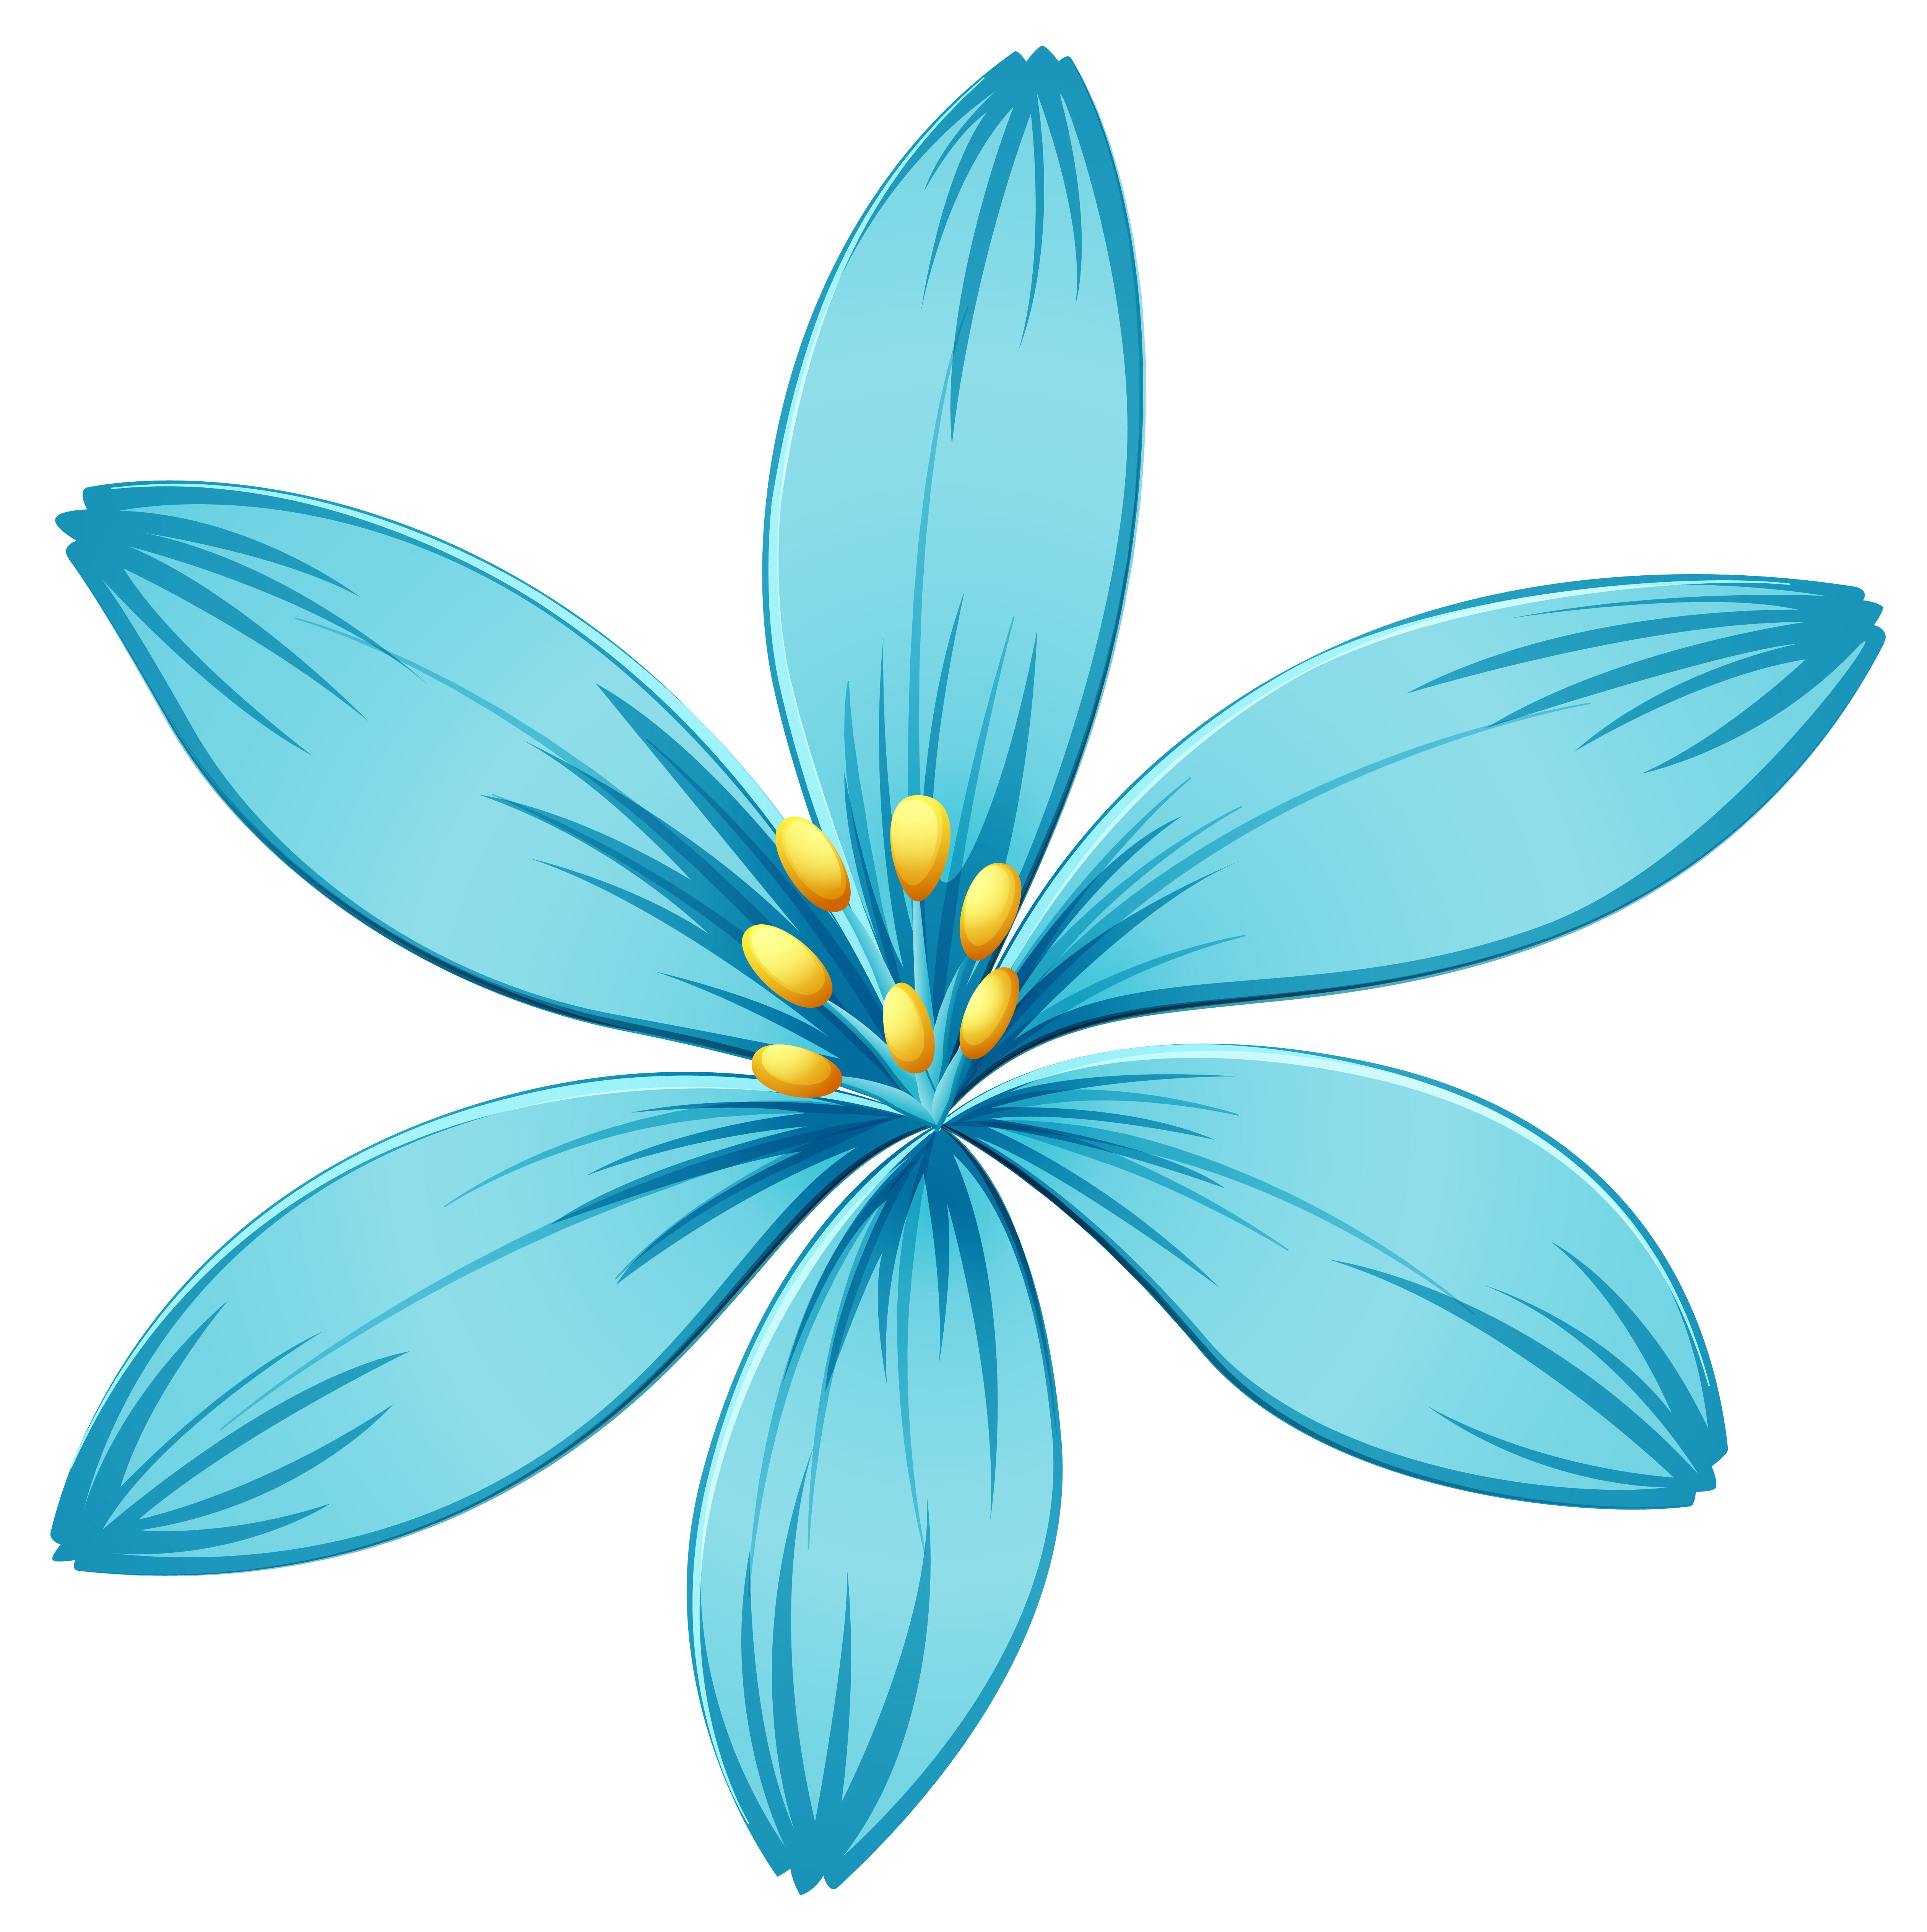 Blue Flower PNG Image | Gallery Yopriceville - High-Quality Images and